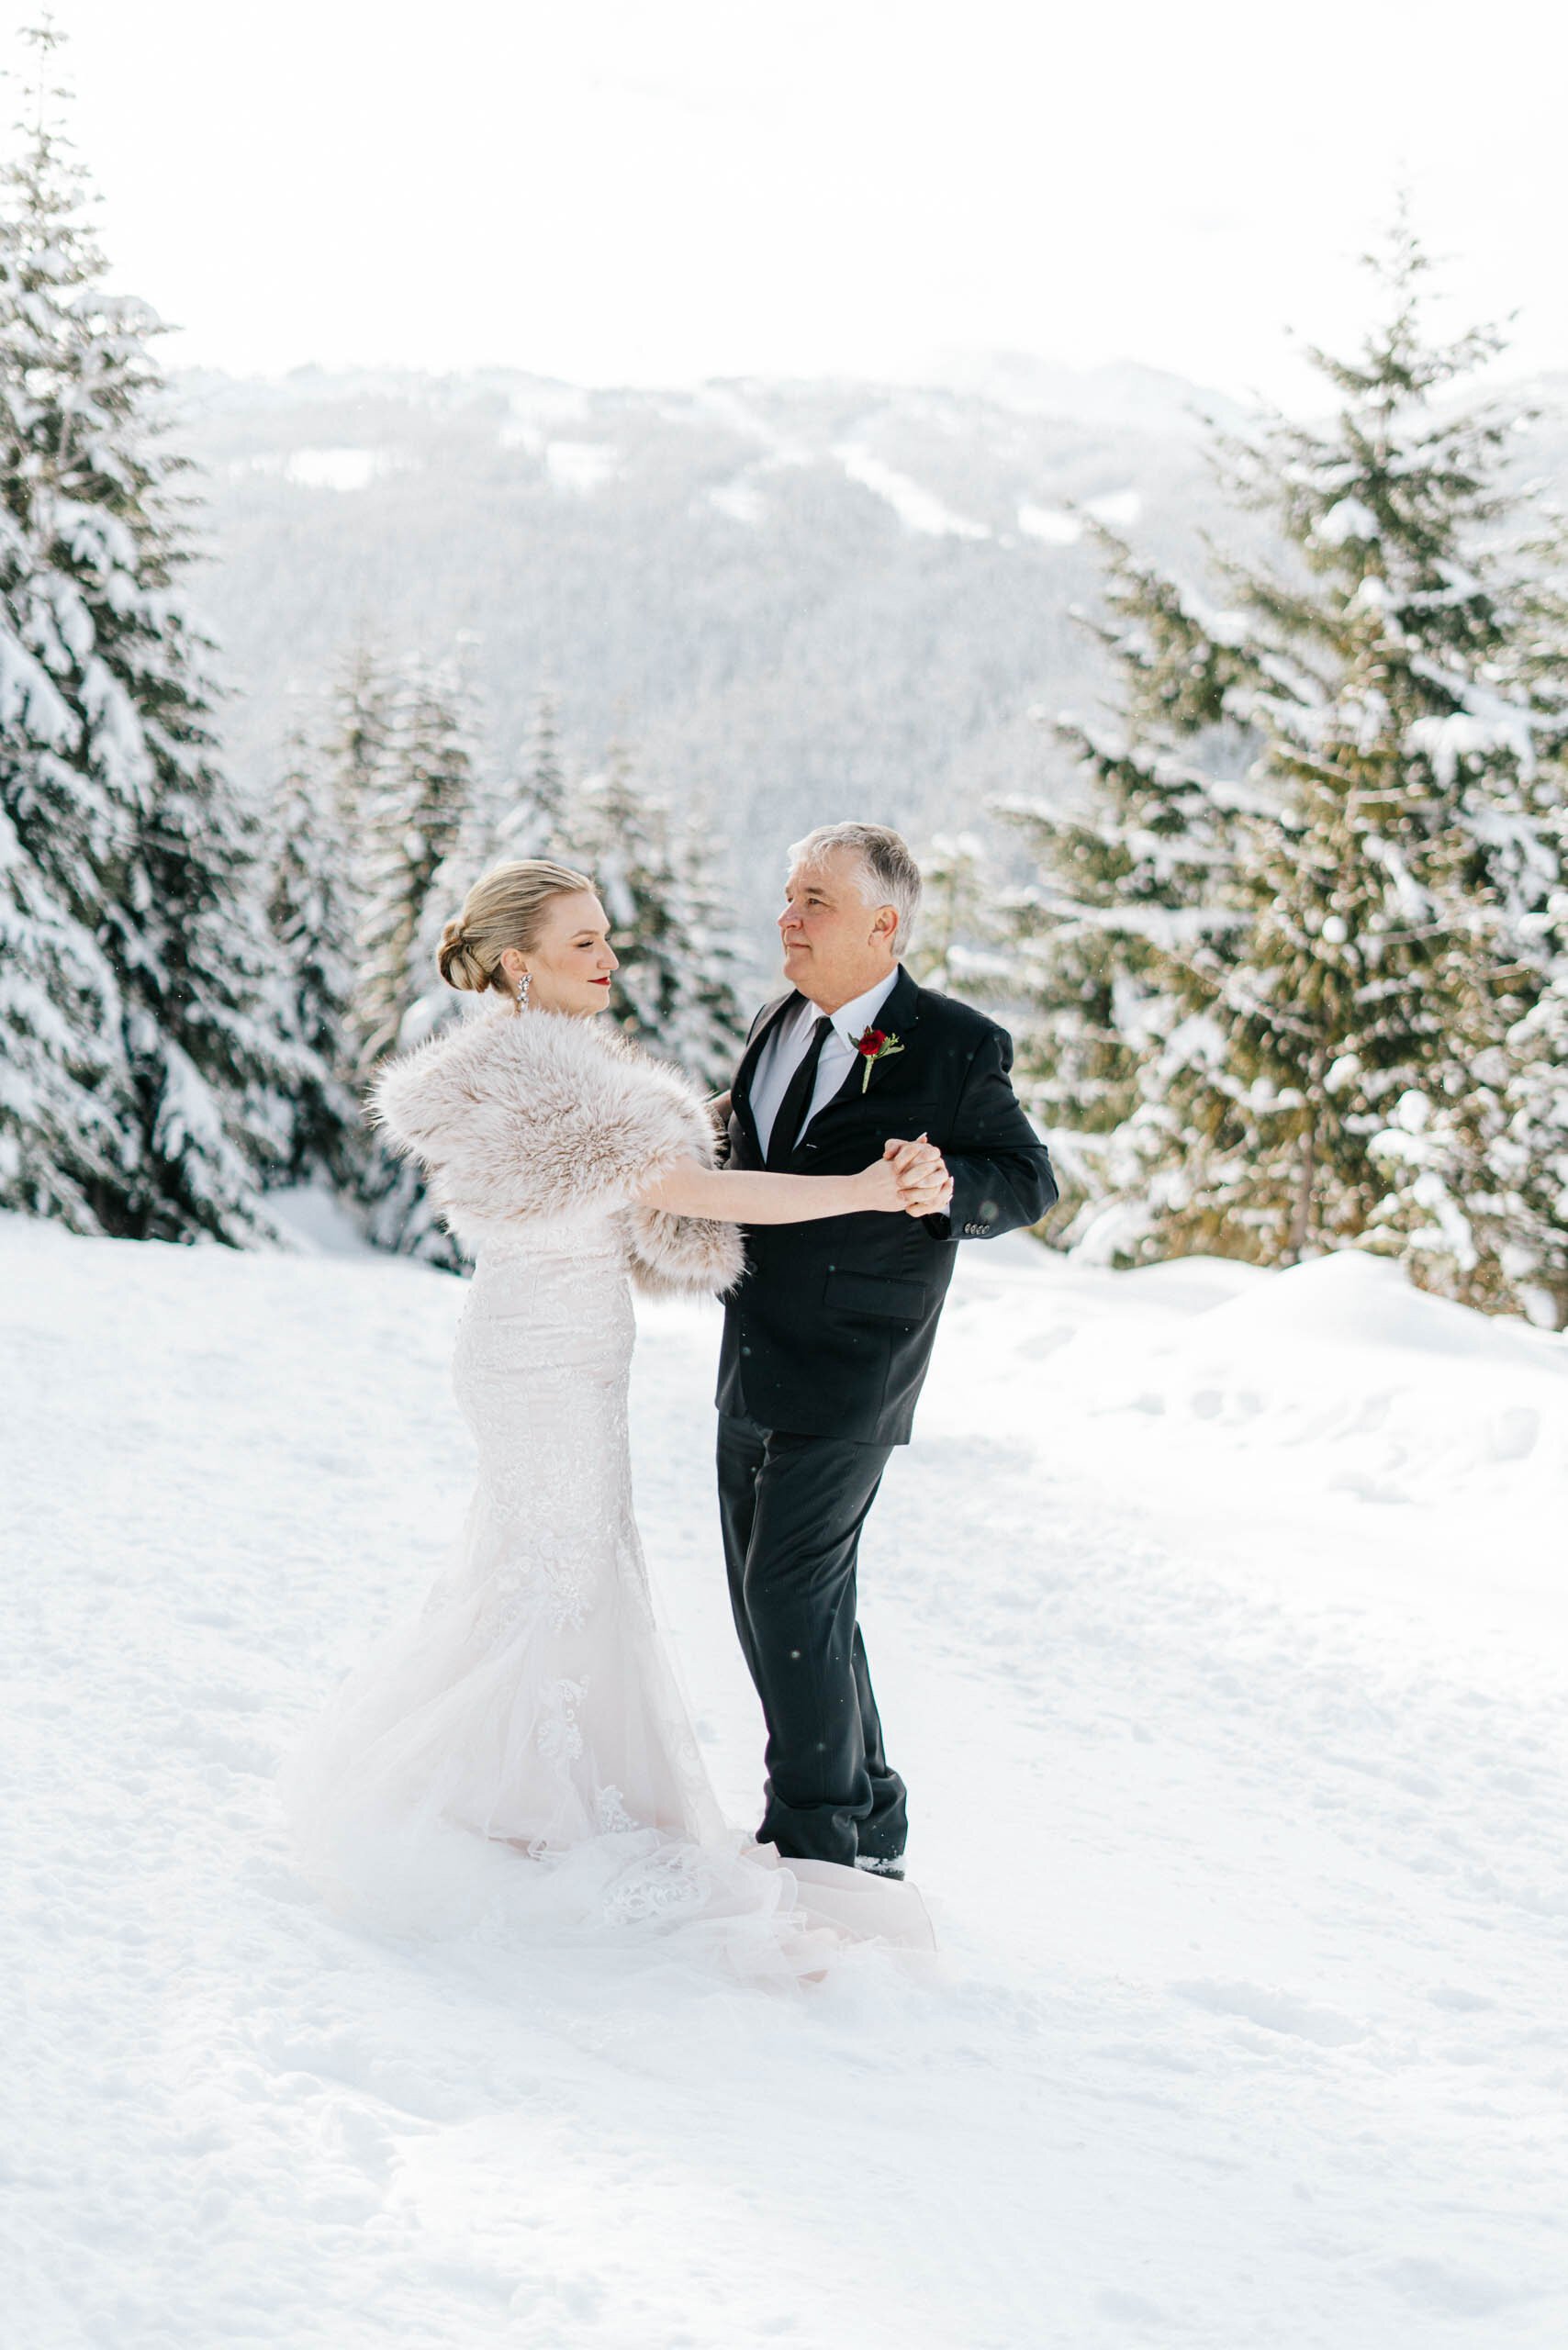 A Bride in lace dress and fur stole dances with her father in the snow in front of beautiful evergreen trees. 